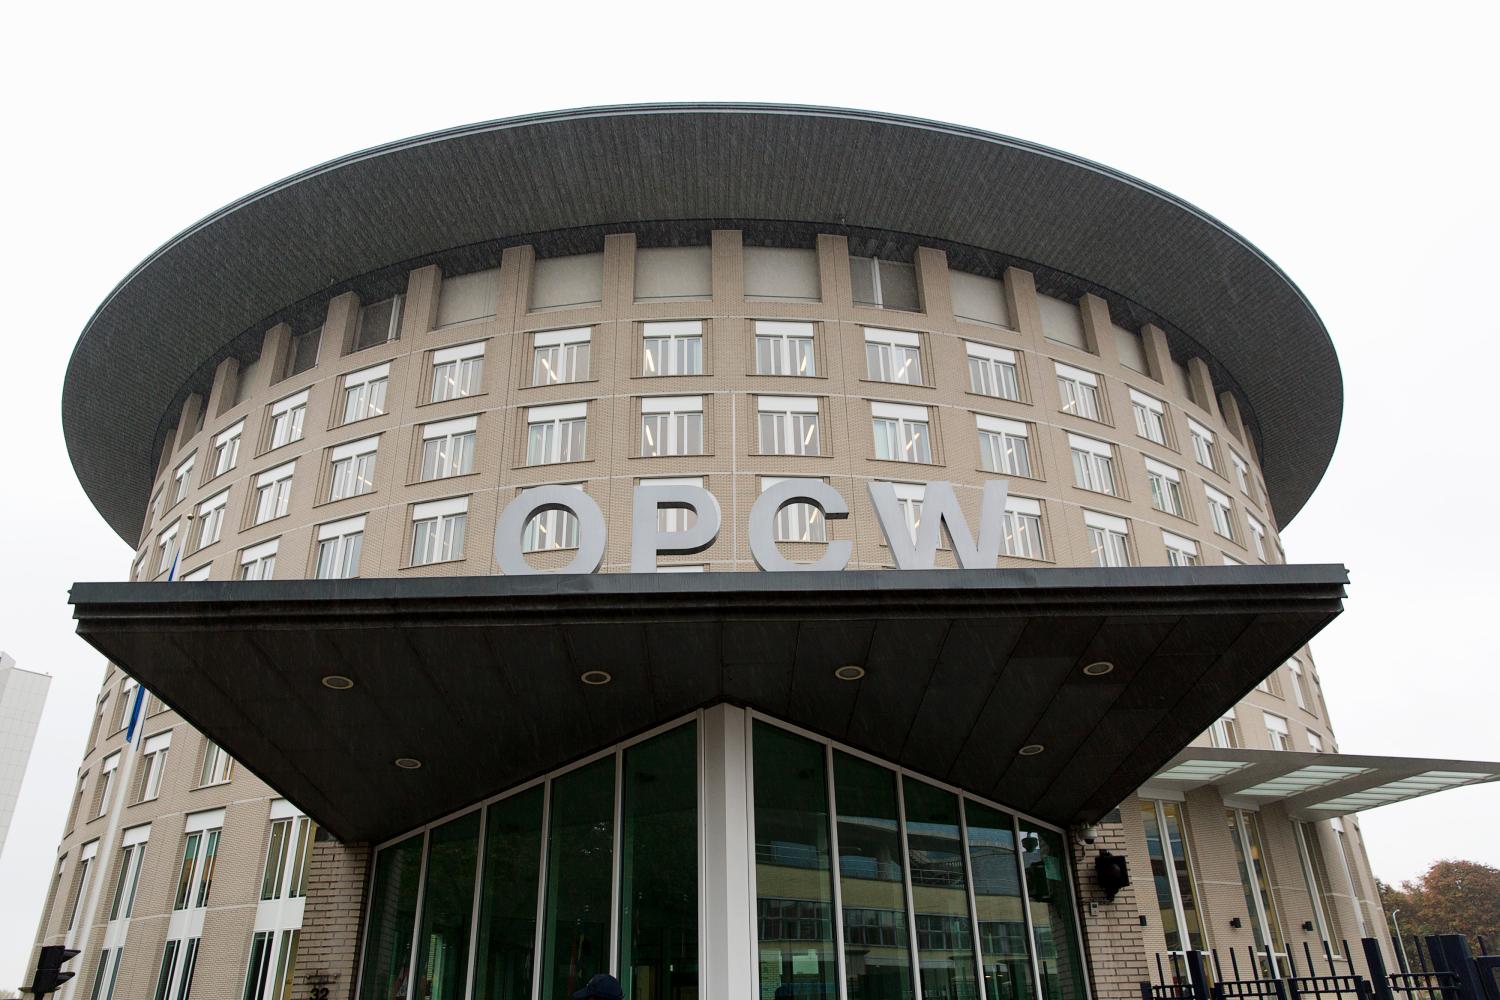 Exterior view of the Organisation for the Prohibition of Chemical Weapons (OPCW) headquarters in The Hague October 11, 2013. The Organisation for the Prohibition of Chemical Weapons (OPCW), which is overseeing the destruction's of Syria's arsenal, won the Nobel Peace Prize on Friday, the Norwegian Nobel Committee said. Set up in 1997 to eliminate all chemicals weapons worldwide, its mission gained critical importance this year after a sarin gas strike in the suburbs of Damascus killed more than 1,400 people in August. REUTERSMichel Kooren (NETHERLANDS - Tags: POLITICS) - RTX1474P